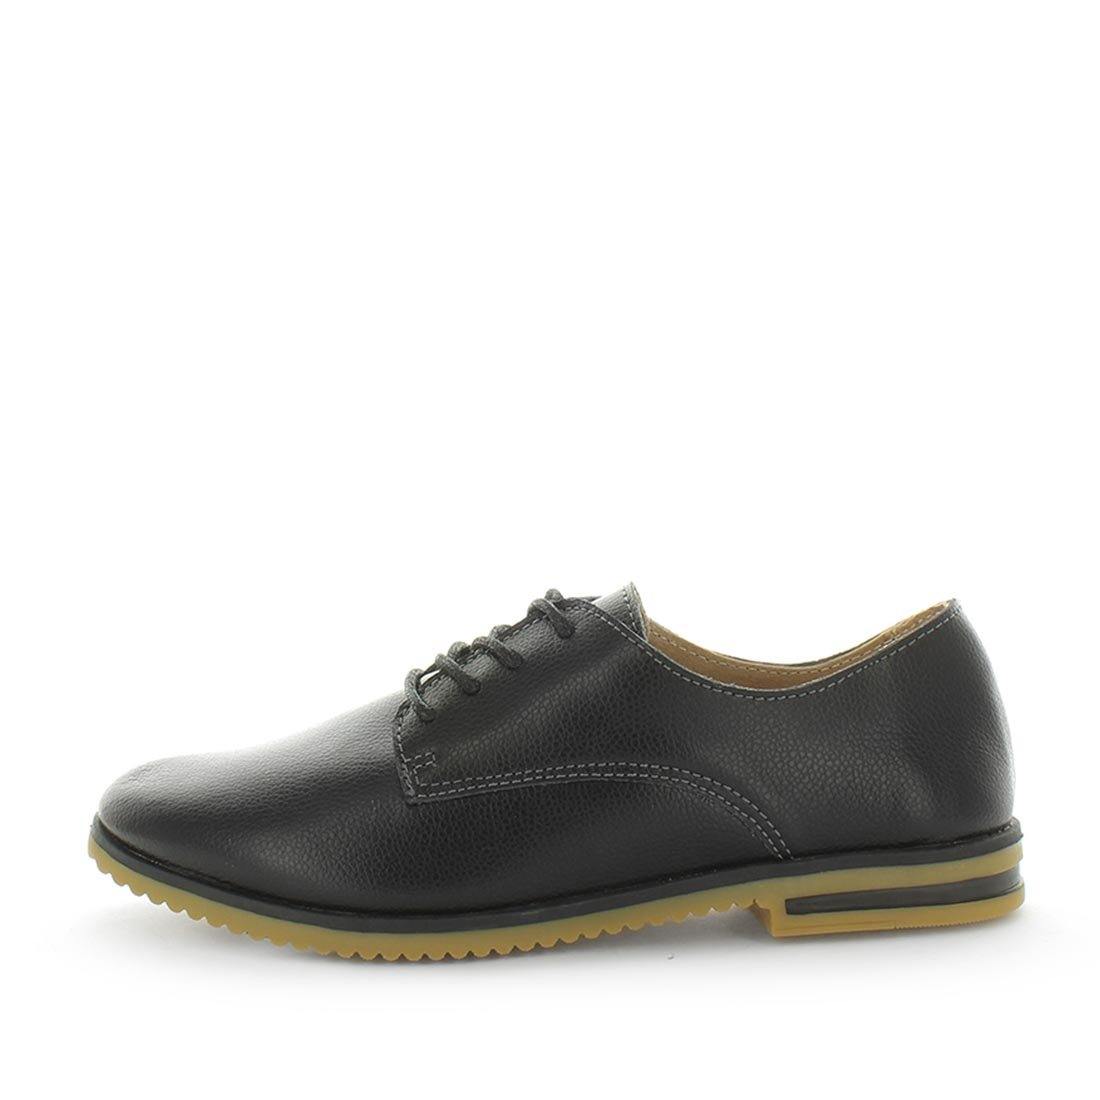 Coronel by Just Bee - Just Bee Comfort - brogue style shoes with lace-up closure, padded extra comfort footbed and leather materials - womens shoes  womens sneakers - womens leather shoes - leather brogues - comfort shoes (4867354787919)